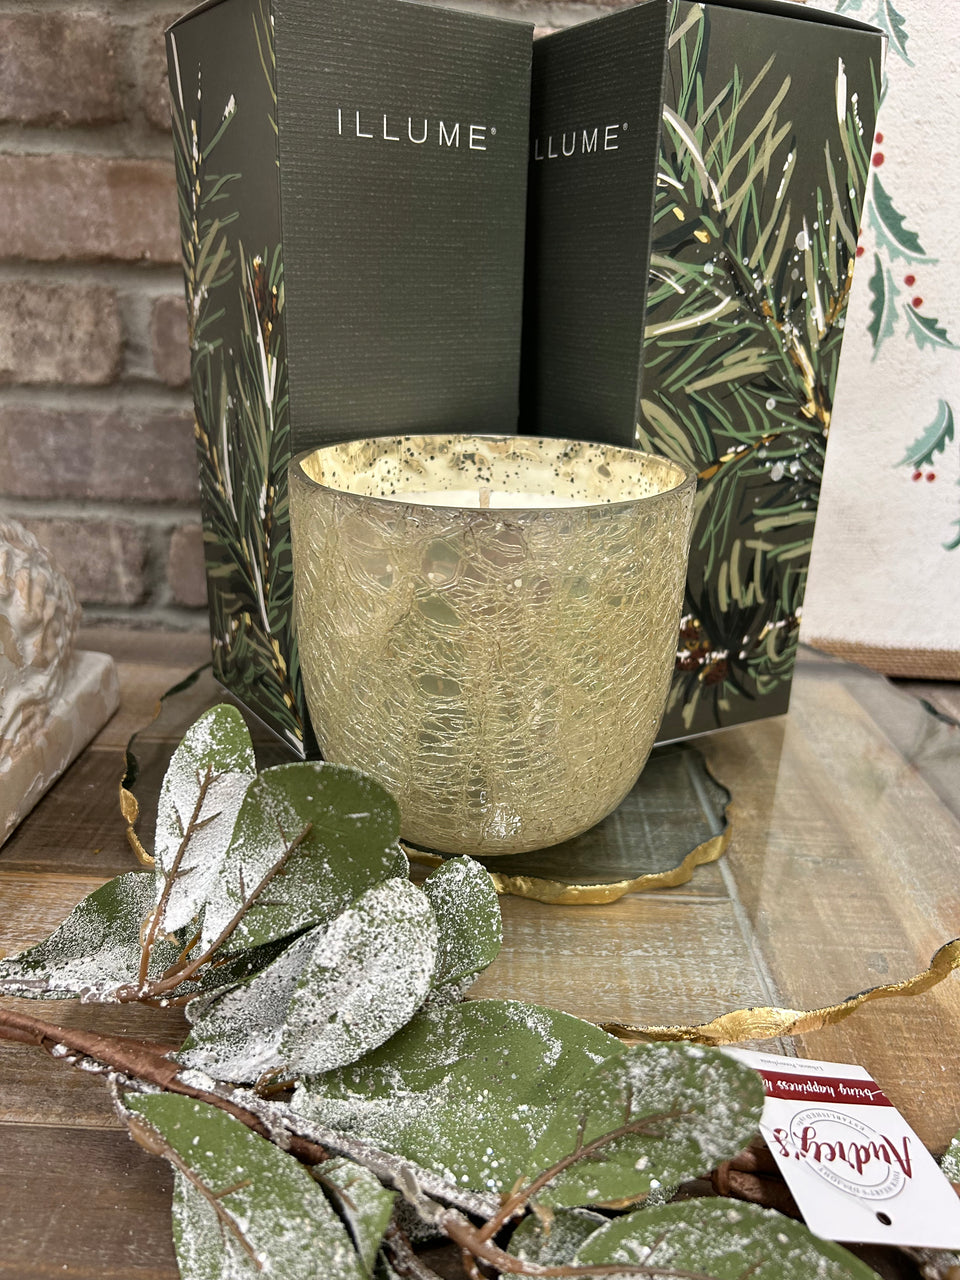 Balsam & Cedar Large Boxed Crackle Glass Candle